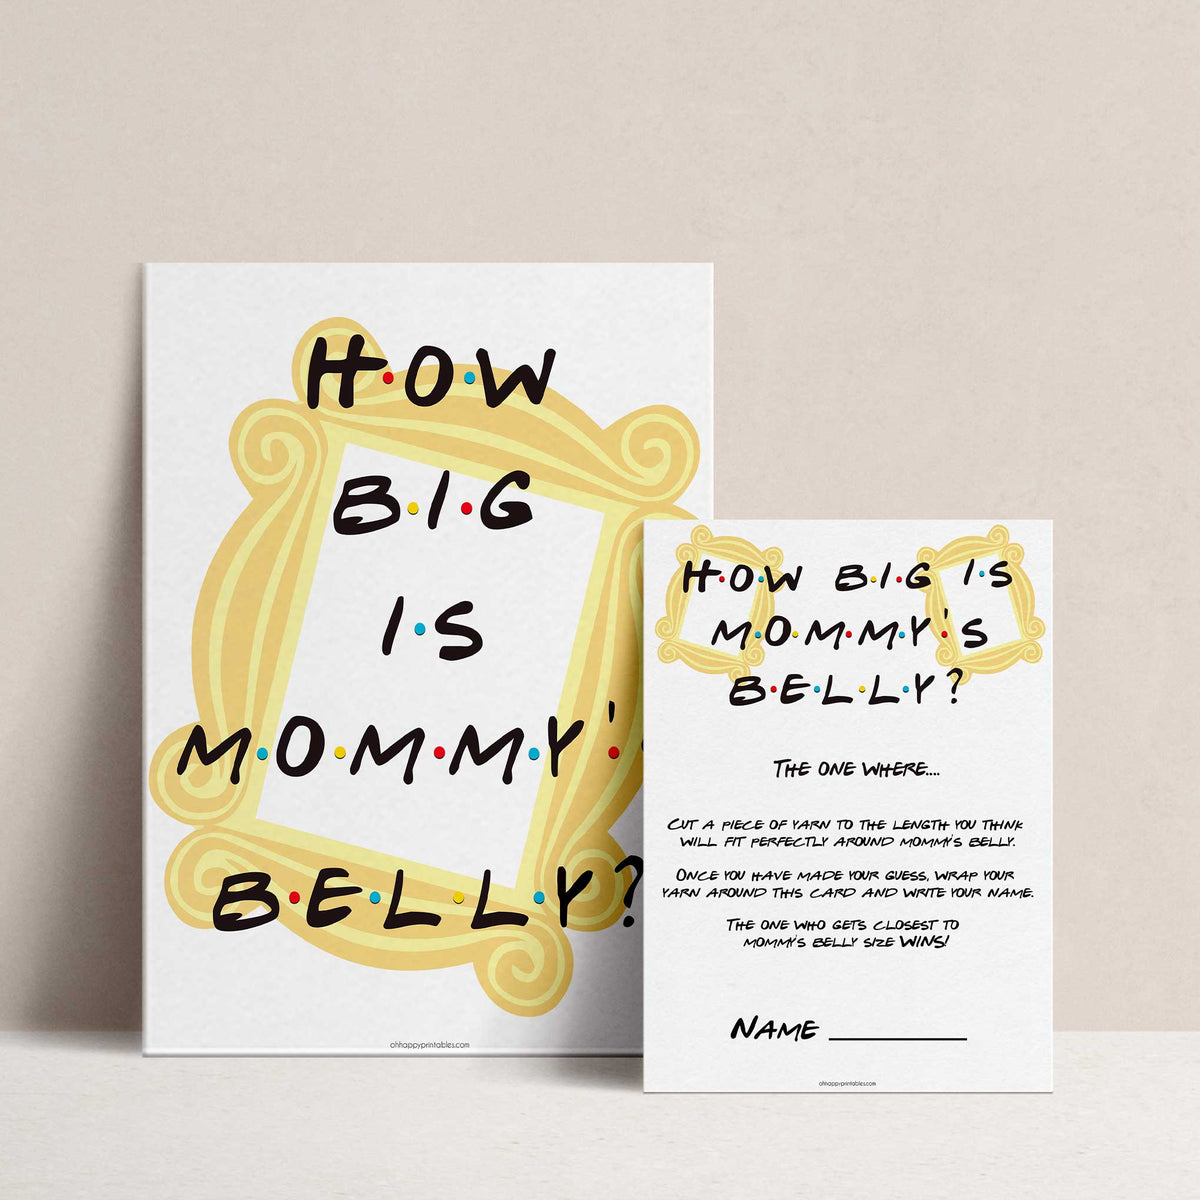 how big is mommys belly game, Printable baby shower games, friends fun baby games, baby shower games, fun baby shower ideas, top baby shower ideas, friends baby shower, friends baby shower ideas